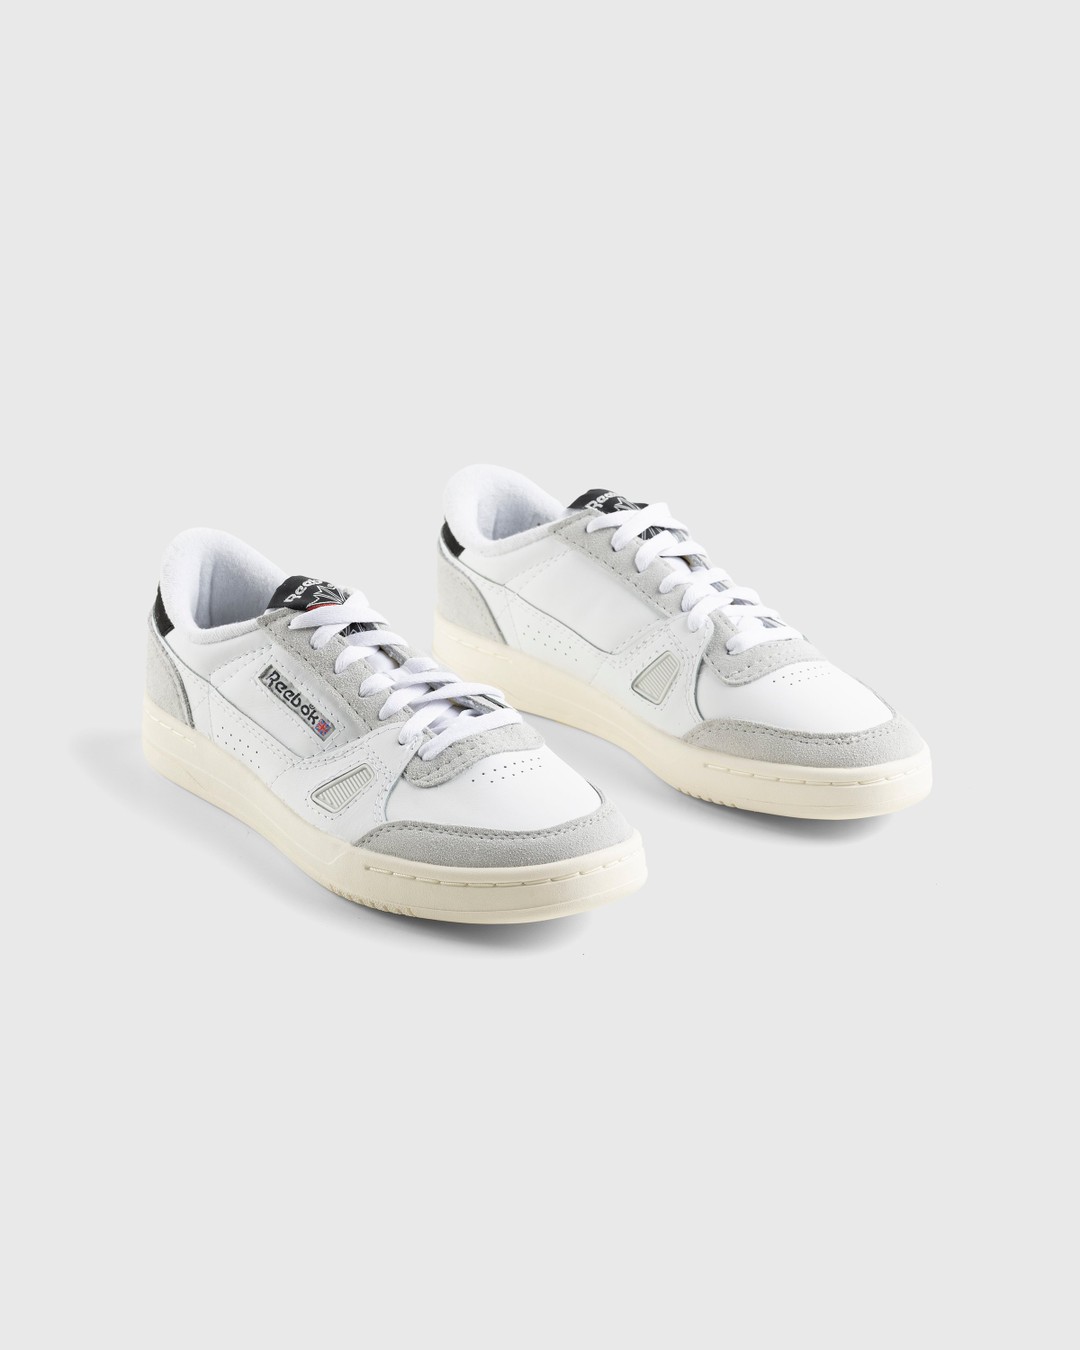 Reebok – LT Court - Low Top Sneakers - White - Image 3